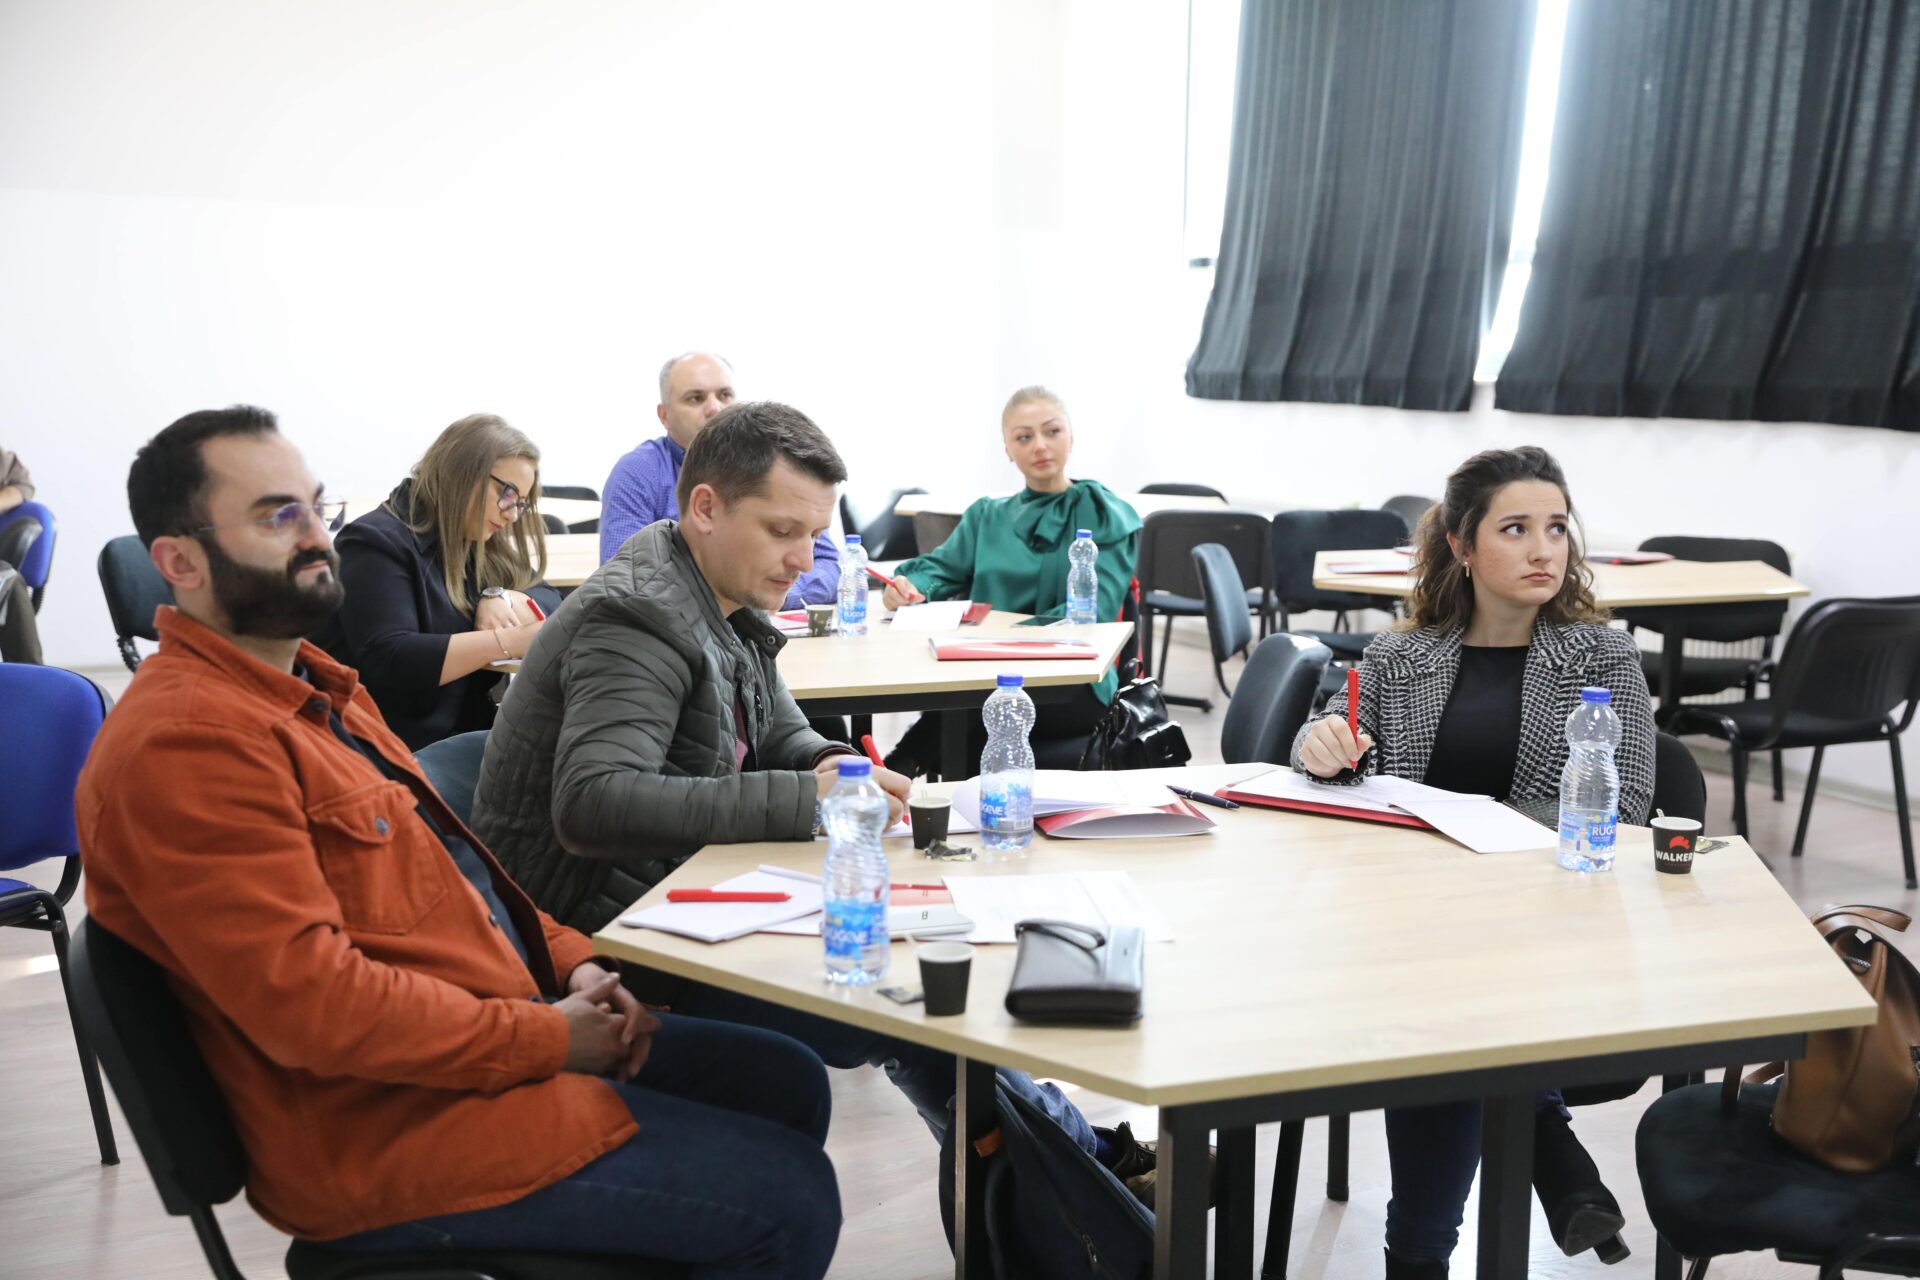 The second training module for the professional development of AAB College personnel is developed